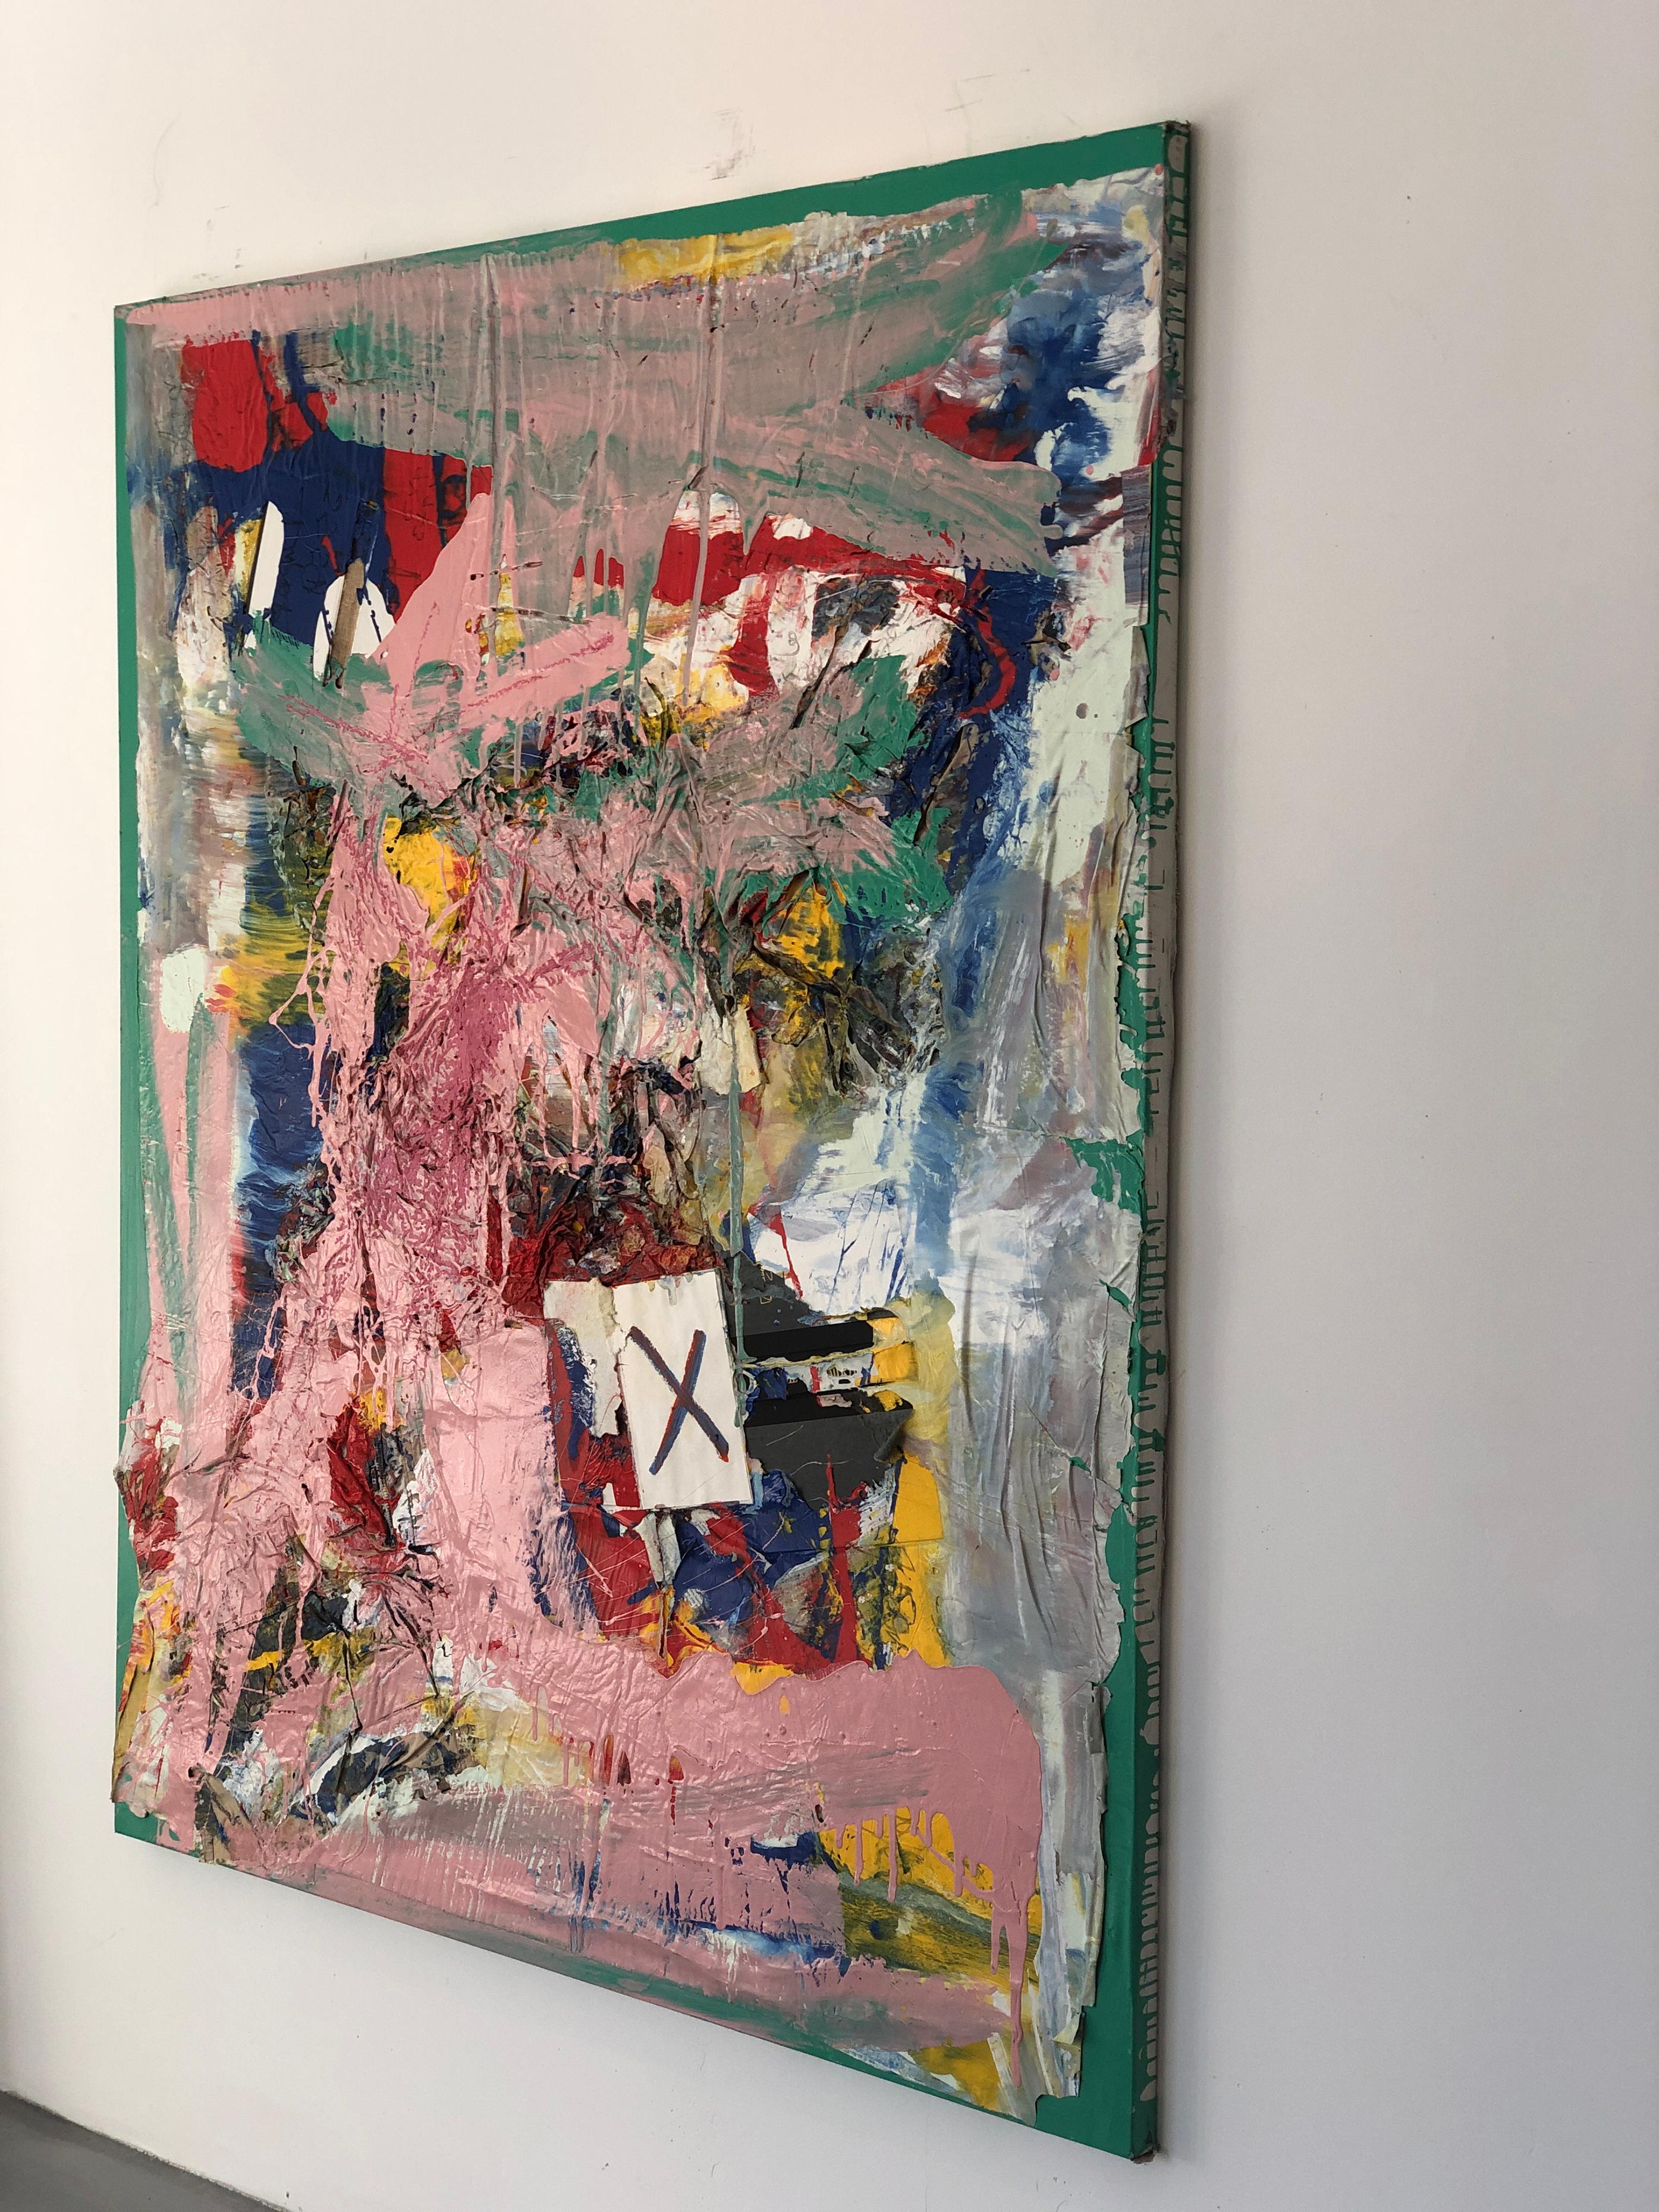 Olympio creates abstract compositions that reflect his internal rhythms, resulting in bold, expressive paintings. Working intuitively, the artist defines his work as his own personal language—an unspoken expression of his soul. Each piece is both